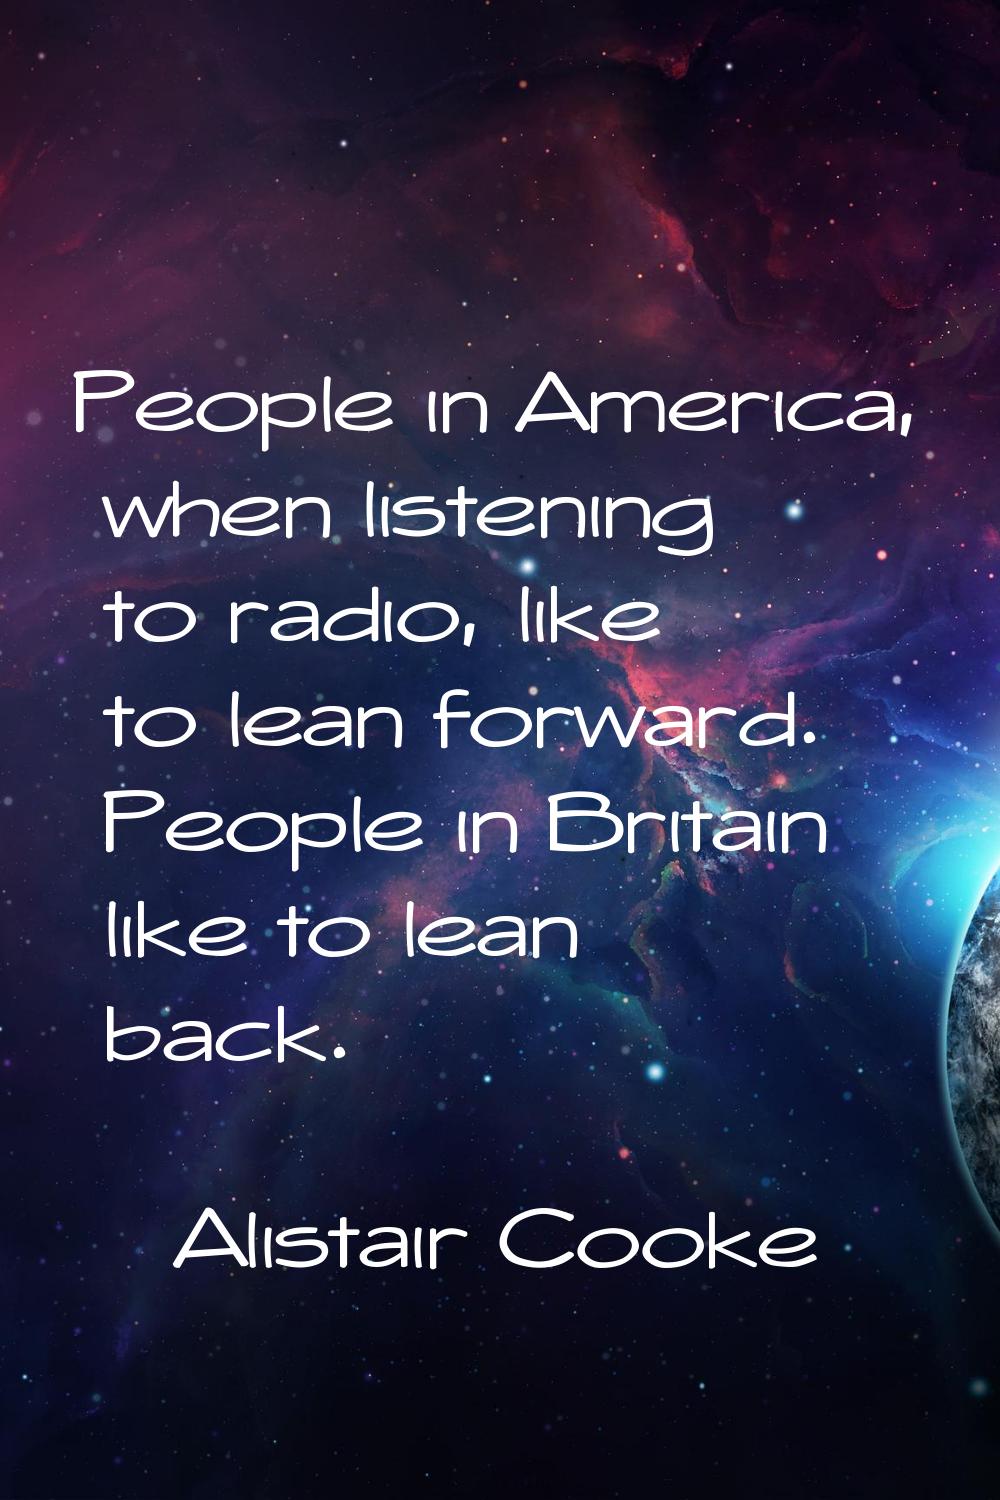 People in America, when listening to radio, like to lean forward. People in Britain like to lean ba